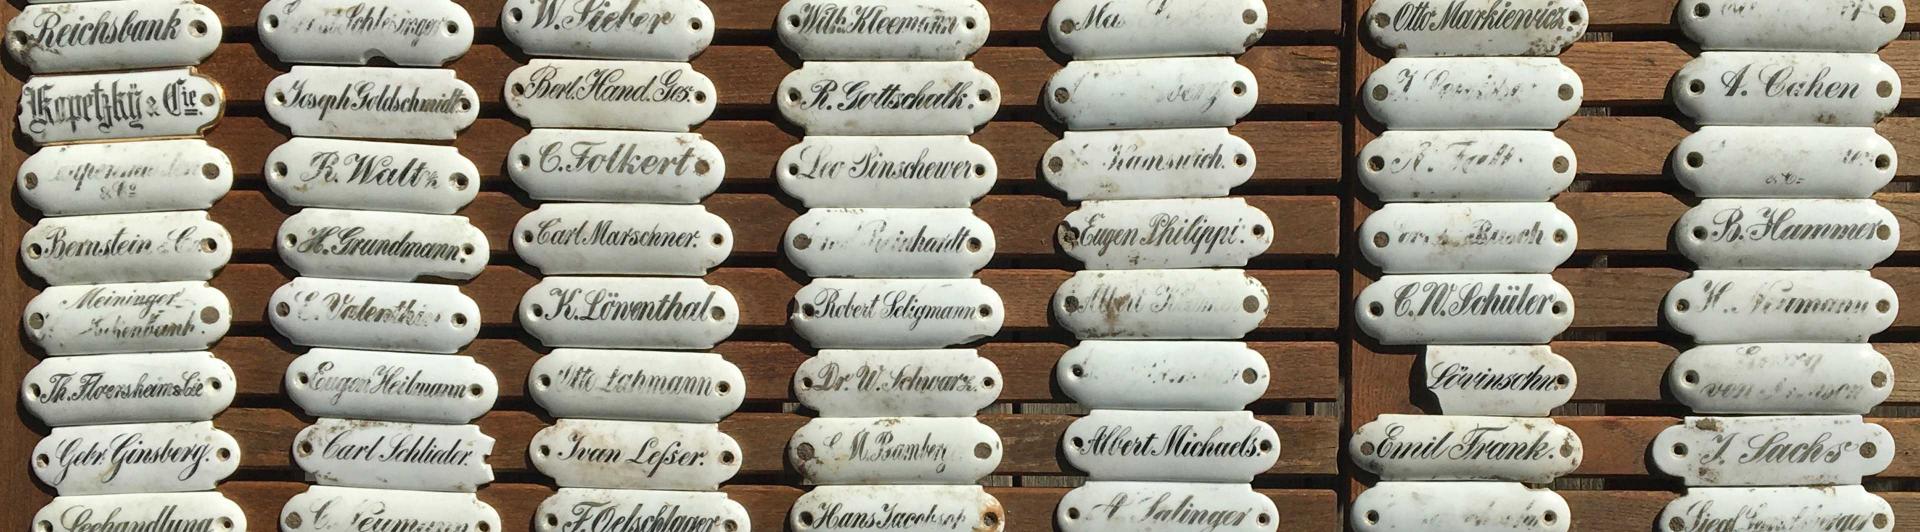 Numerous small white porcelain name tags are lined up on a wooden table. 